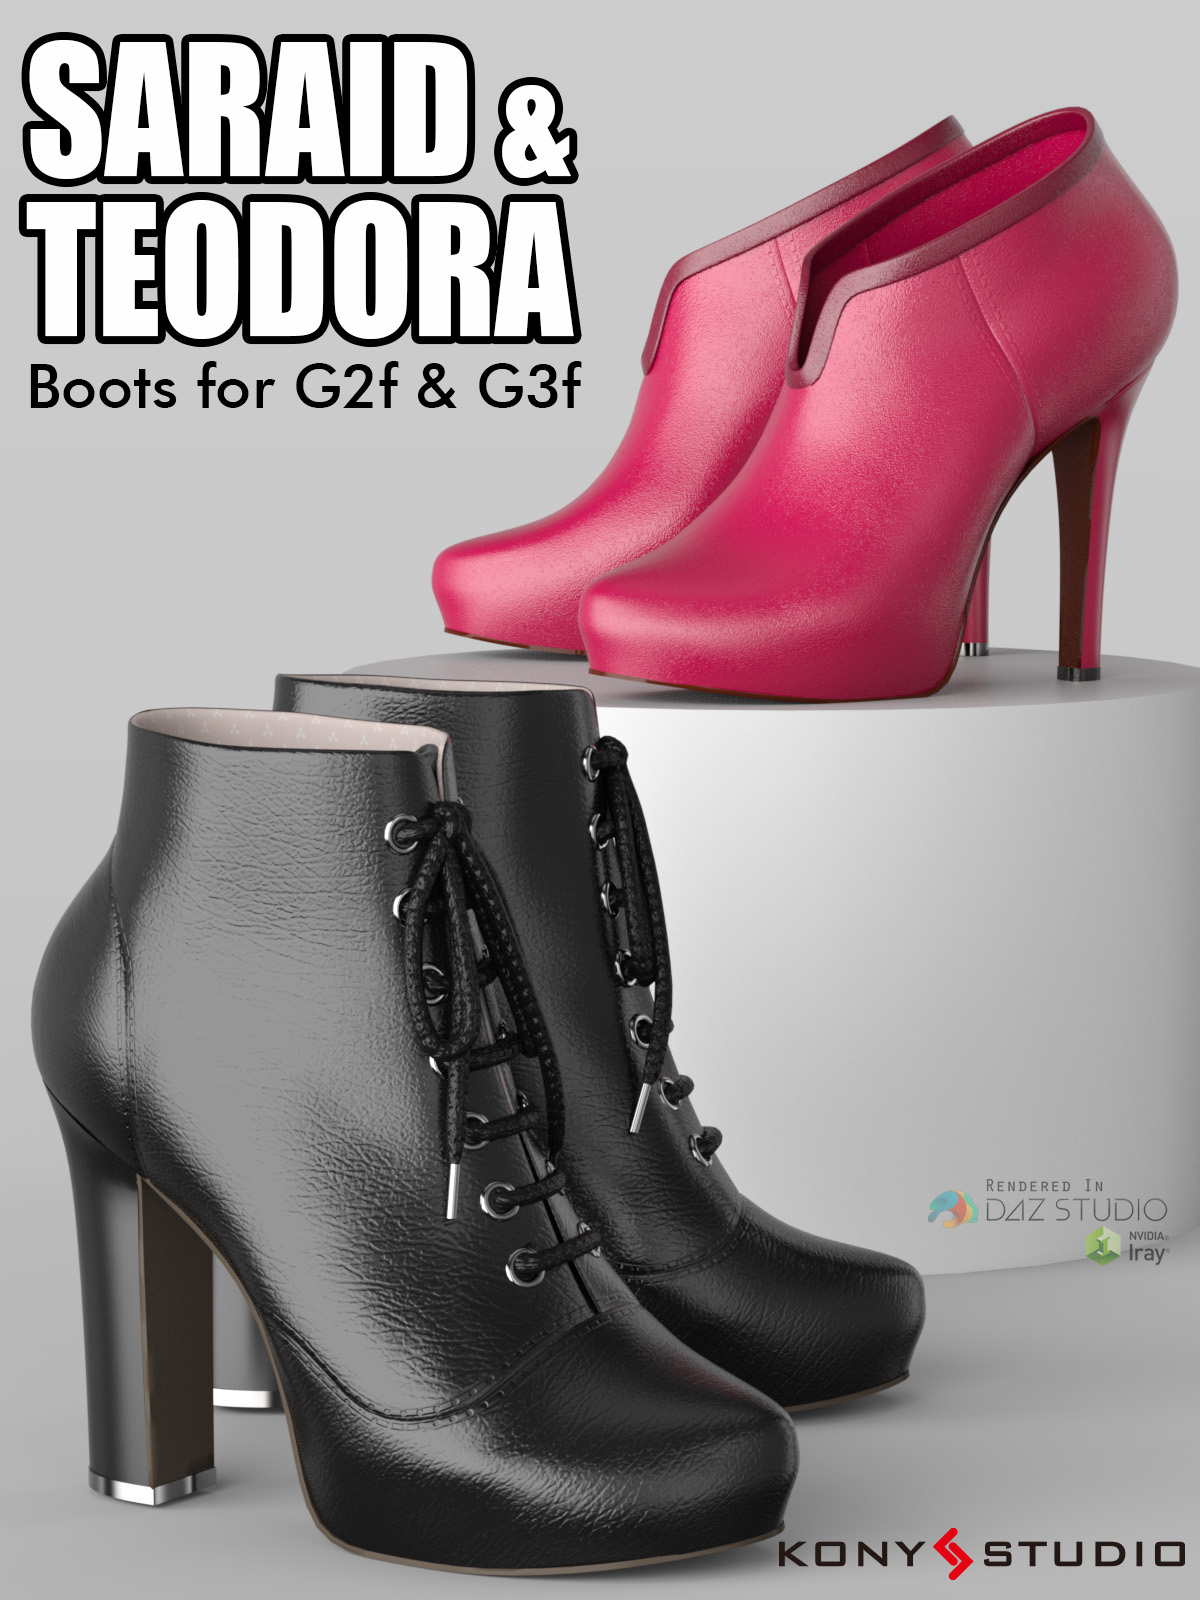 Saraid & Teodora Boots for G2f and G3f